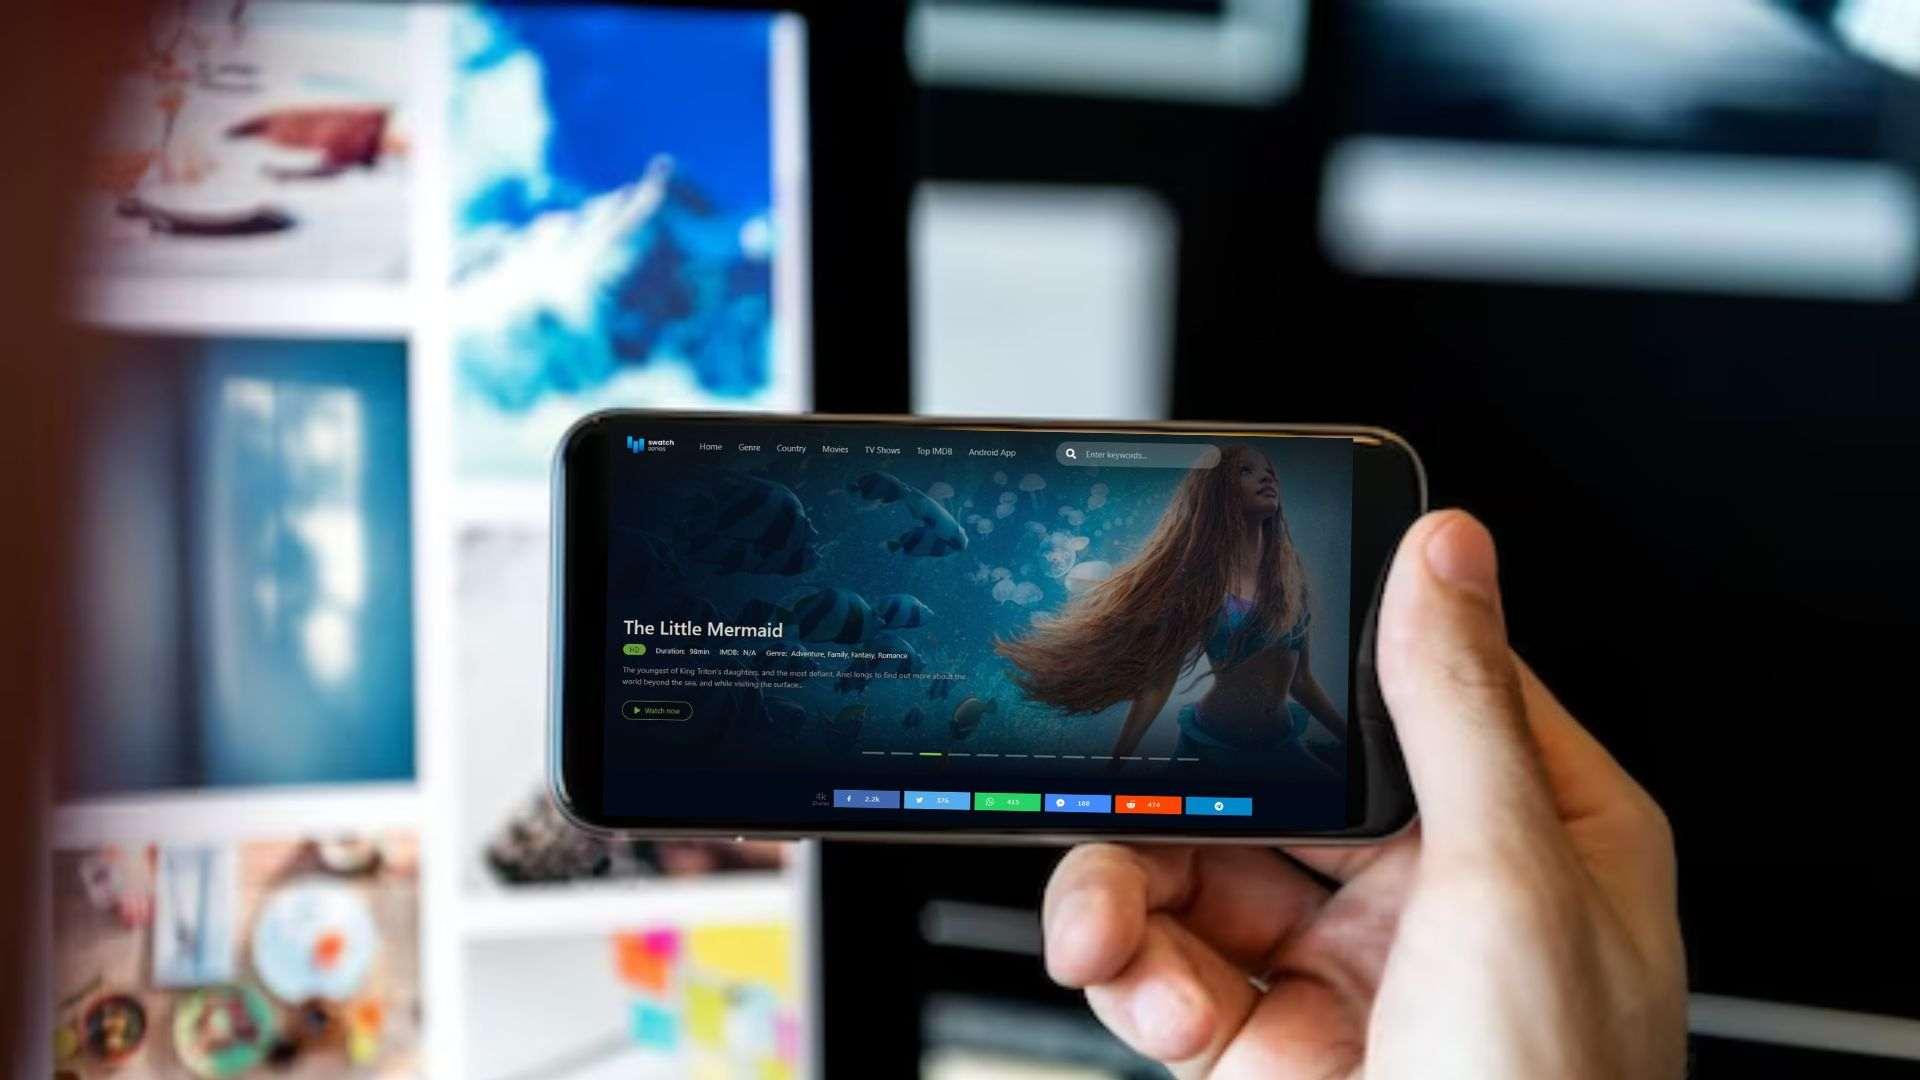 How Can You Watch Movies and TV Shows on SWatchSeries?